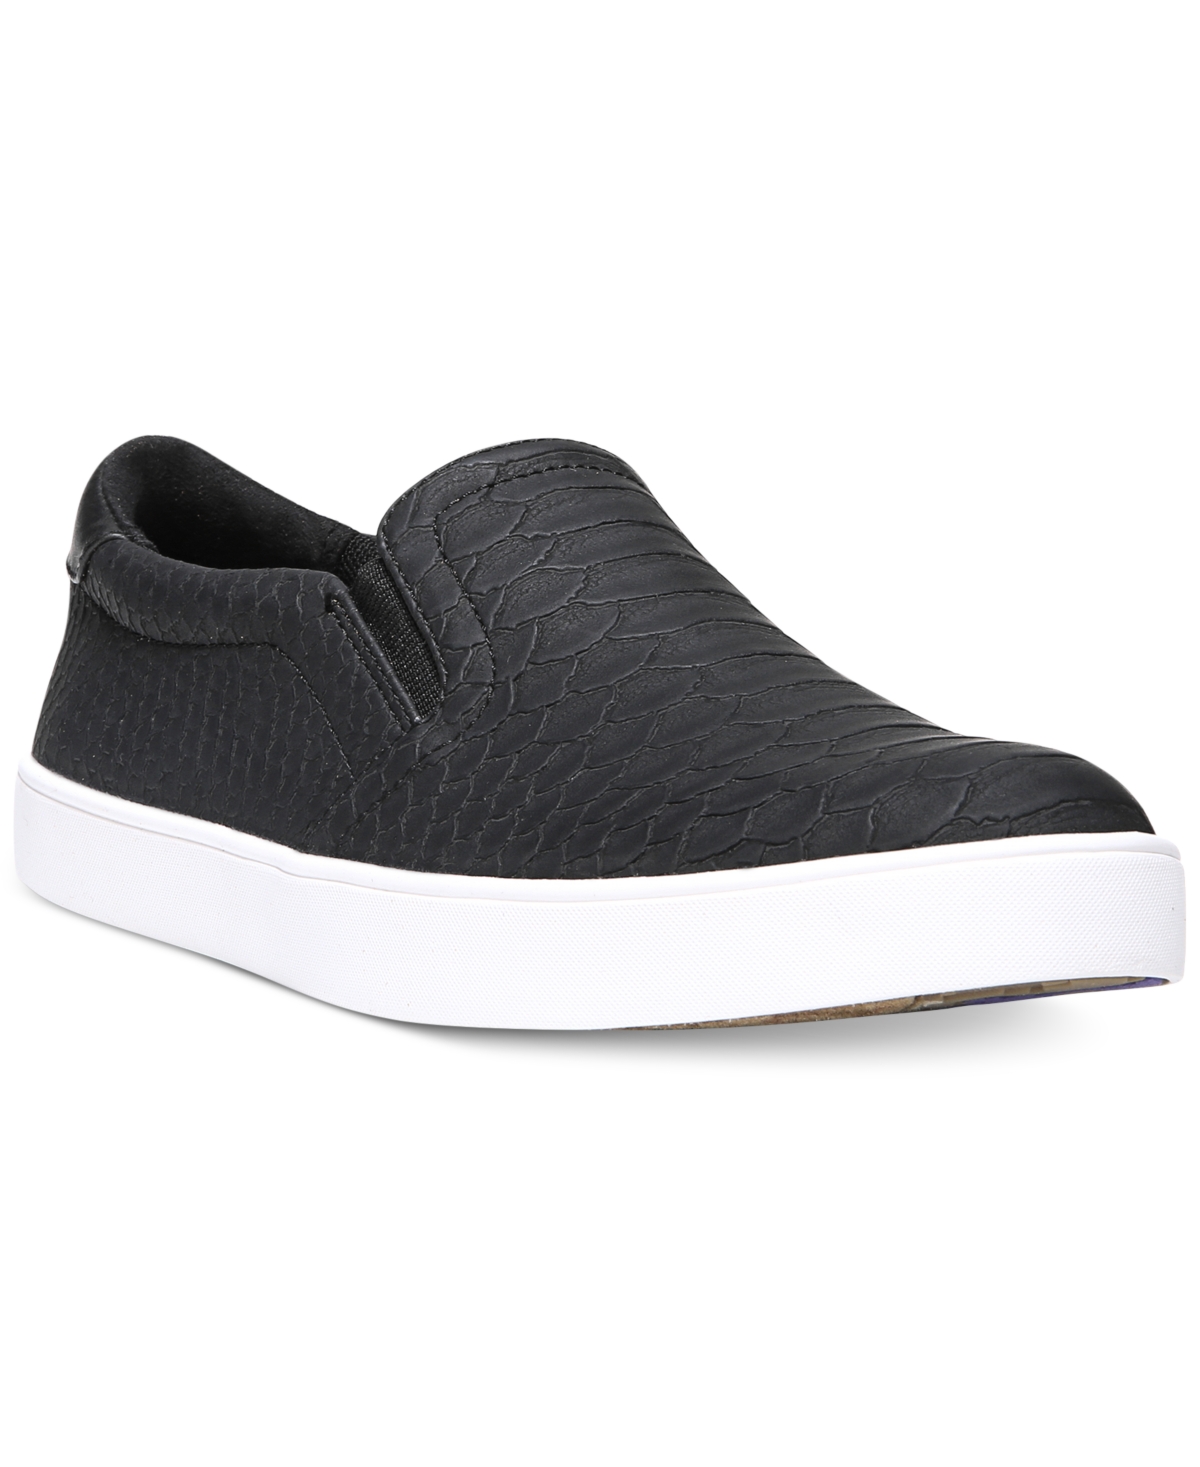 UPC 727679380256 product image for Dr. Scholl's Women's Madison Slip on Sneakers Women's Shoes | upcitemdb.com